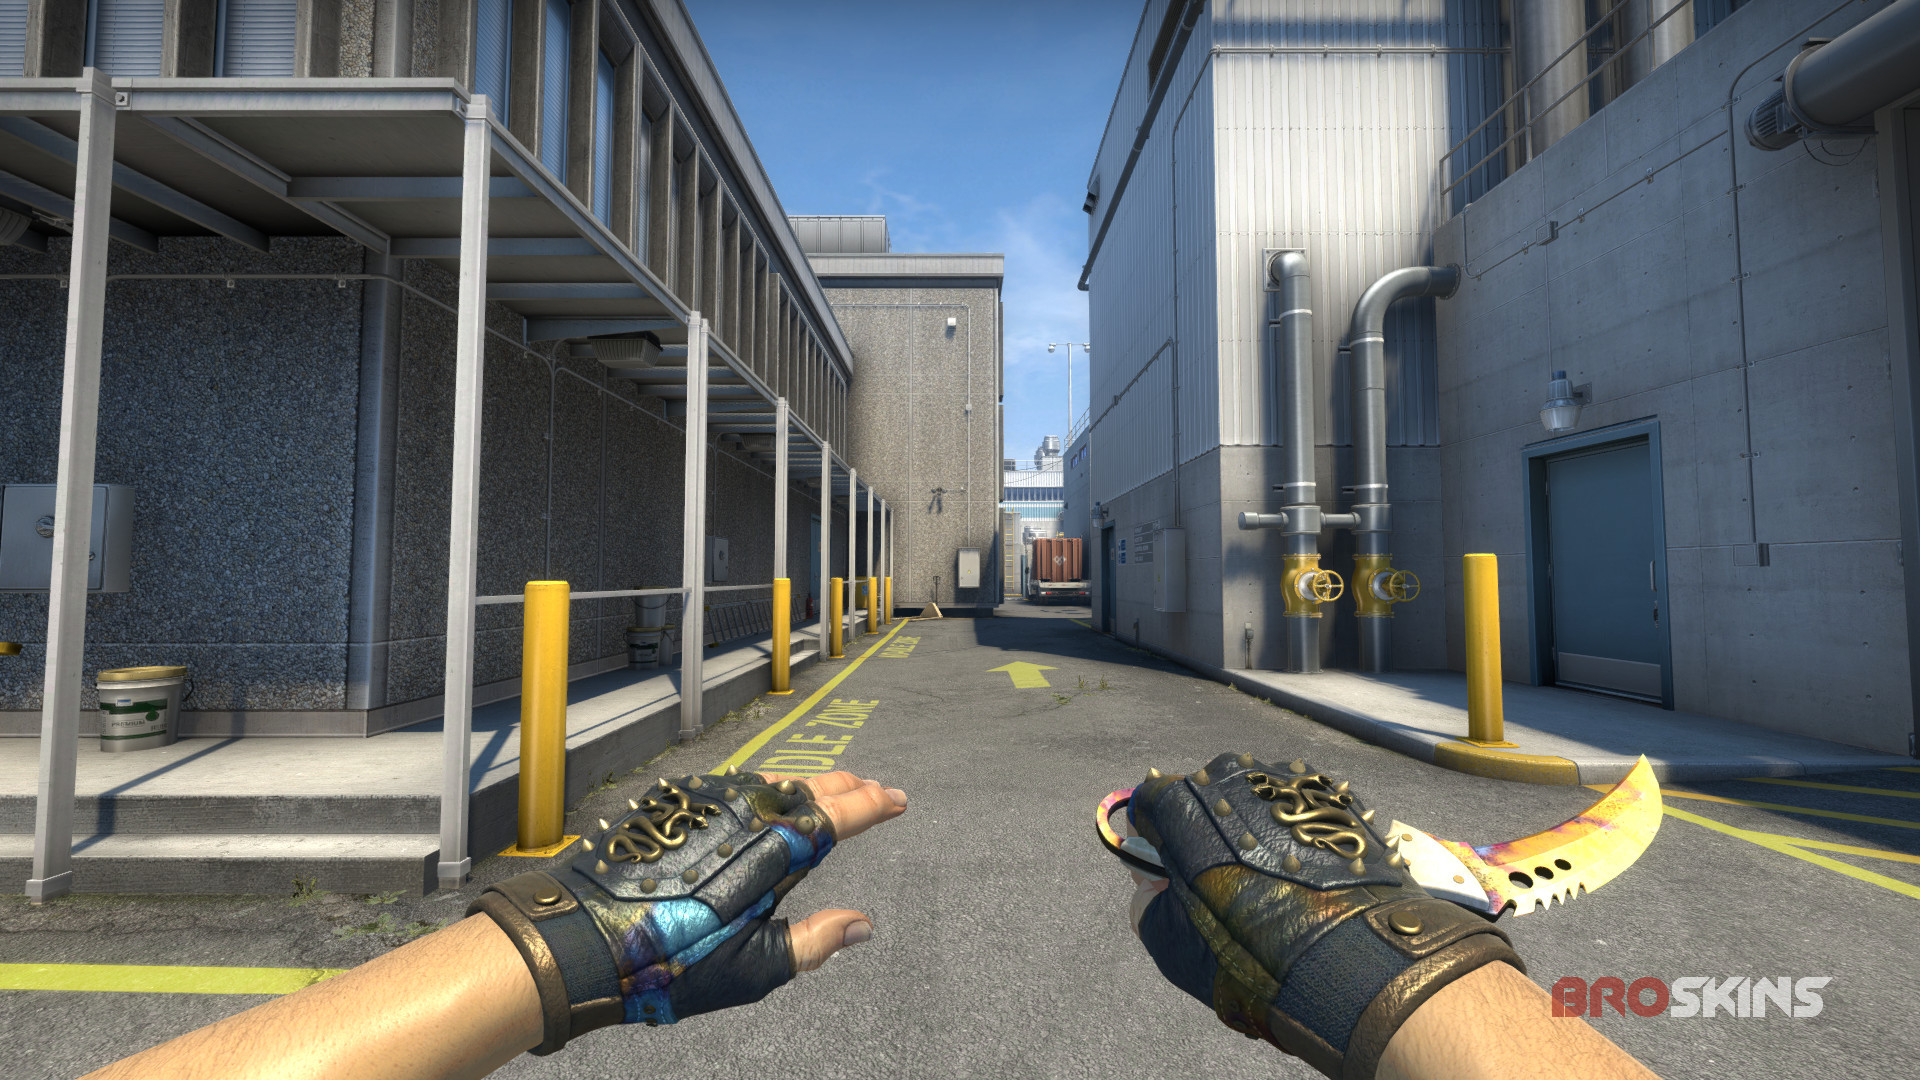 Hydra gloves case hardened factory new free tor browser download hyrda